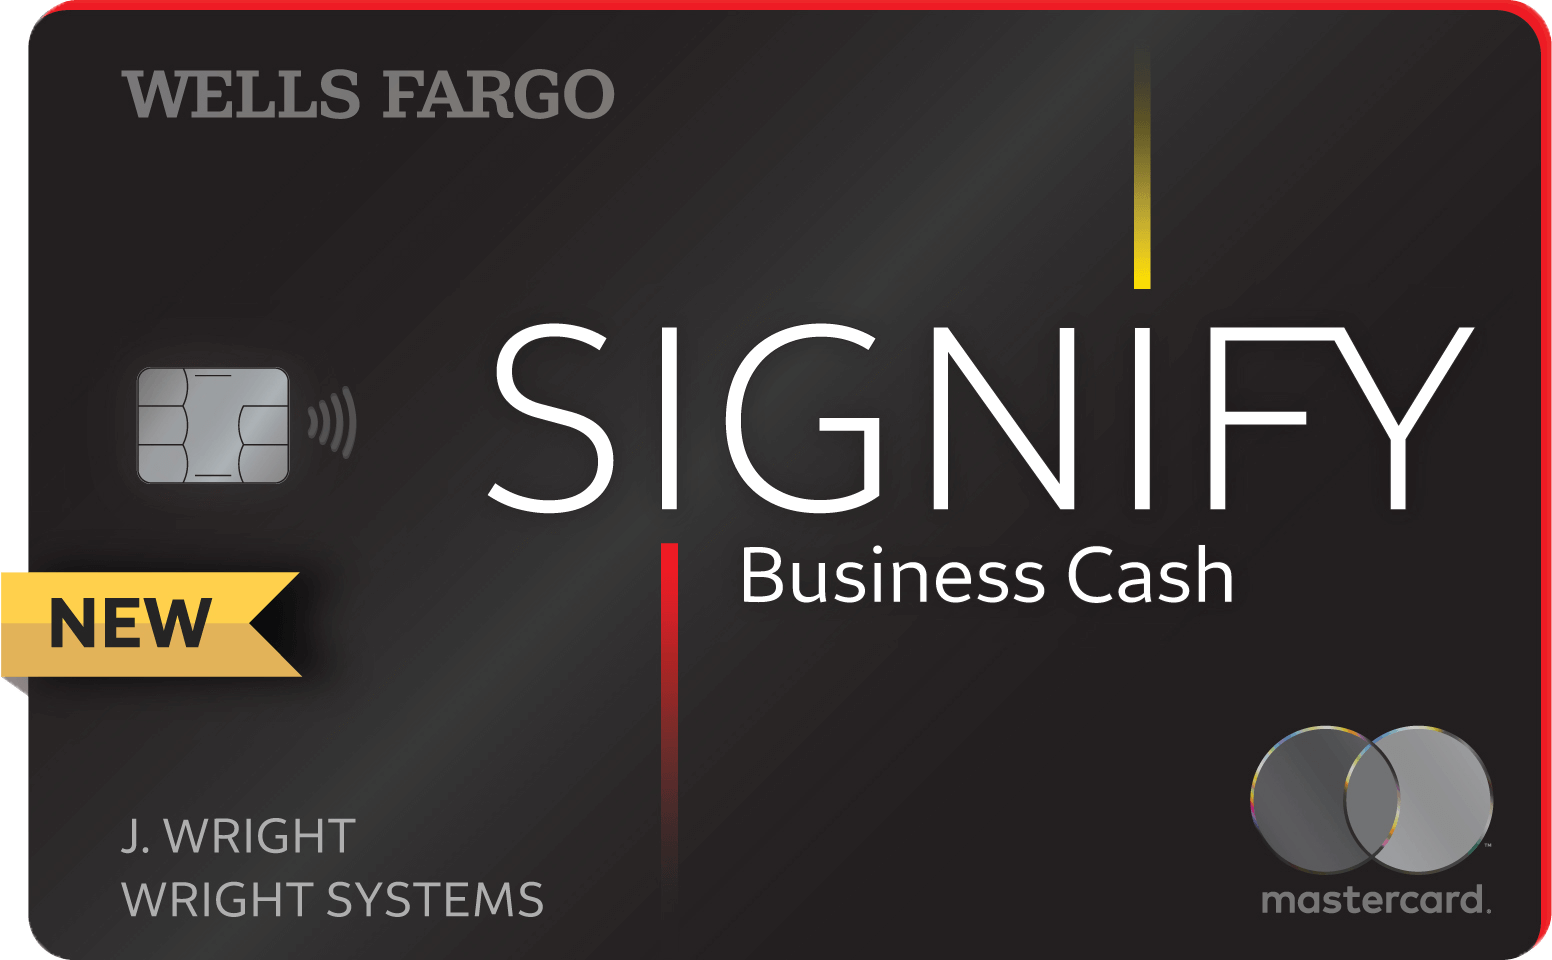 Wells Fargo Signify Business Cash℠ Card with chip and contactless tap to pay technology.